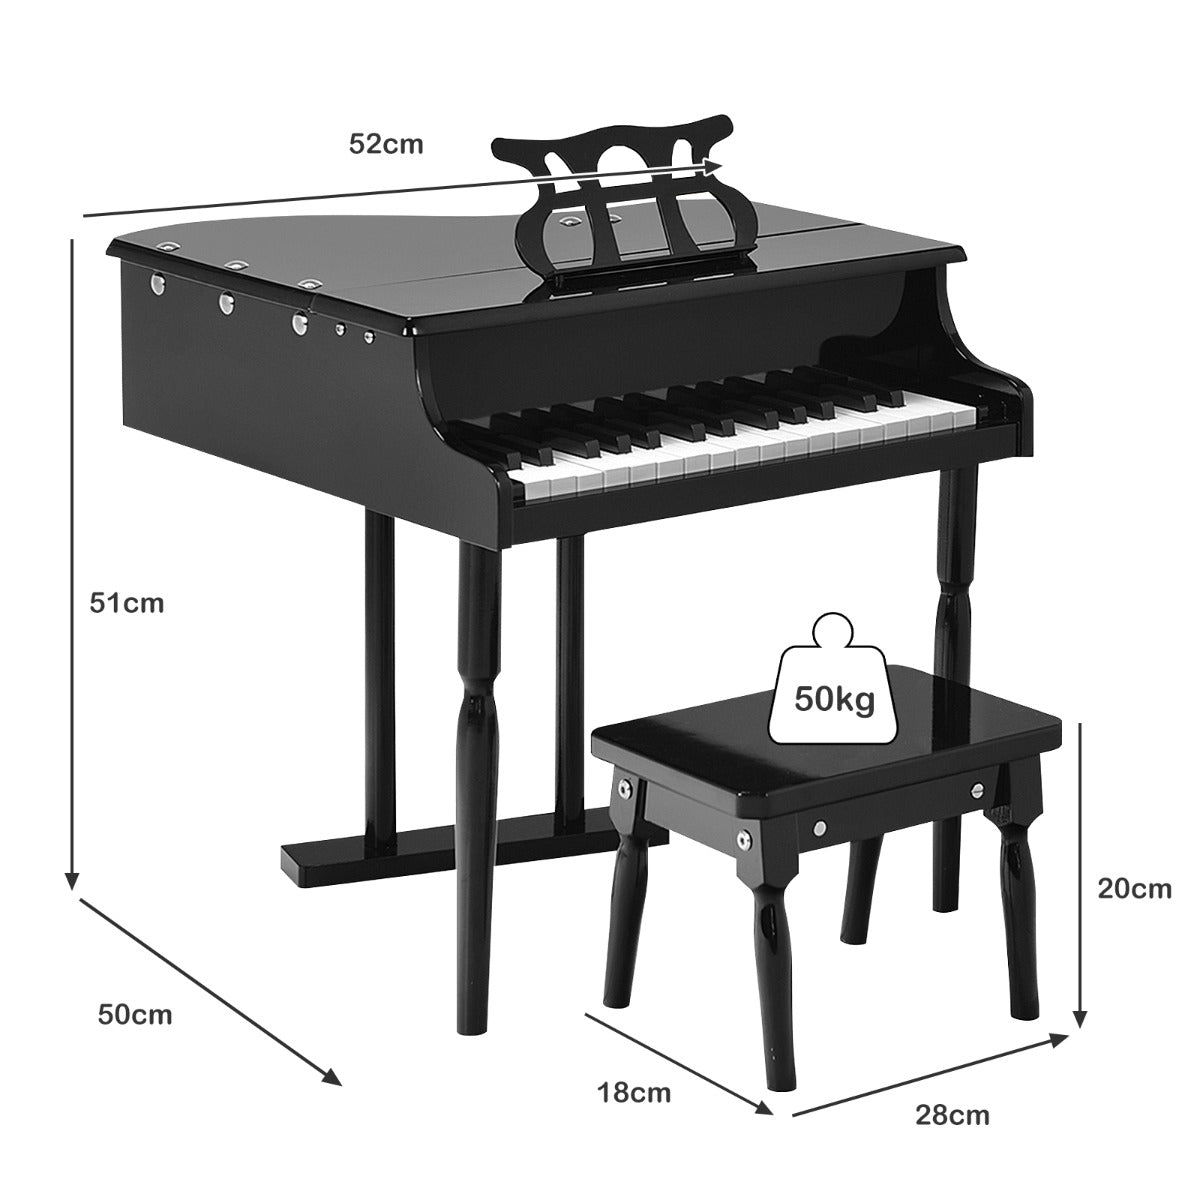 Get the Black Piano Keyboard Toy for Young Musicians